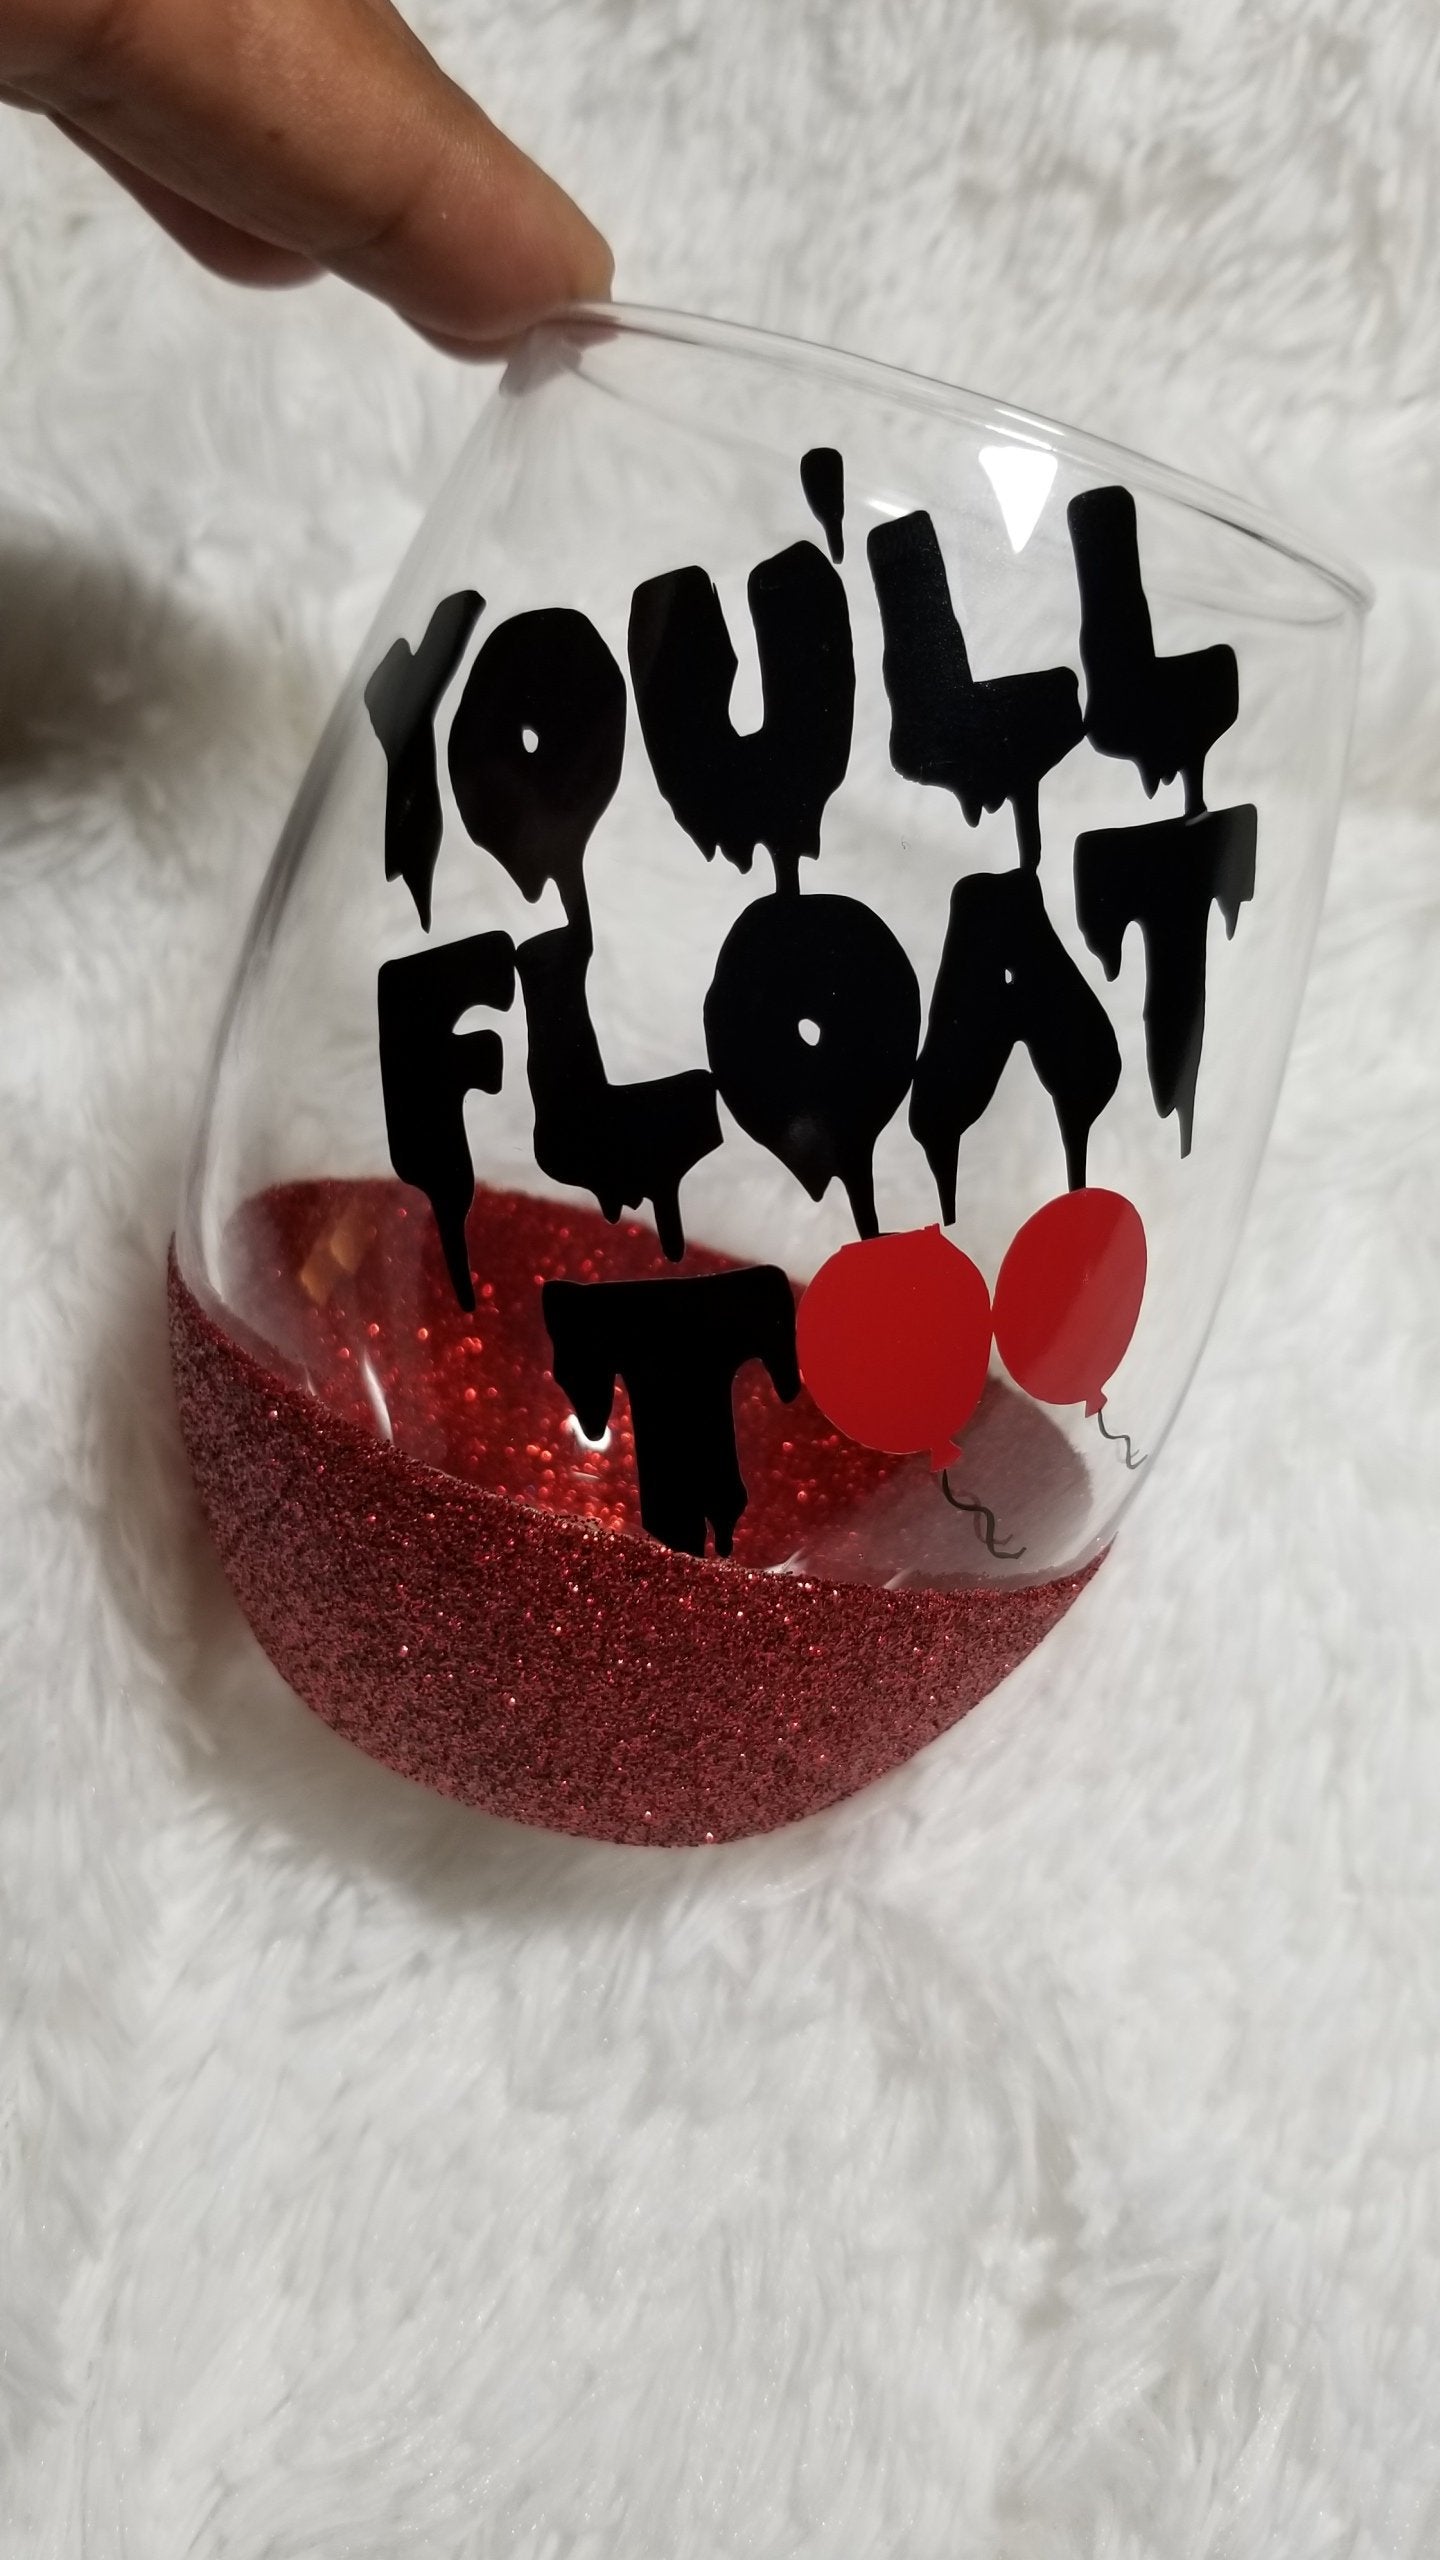 IT wine glass, glitter wine glass, You'll float too, Pennywise,   Horror wine glass - CCCreationz